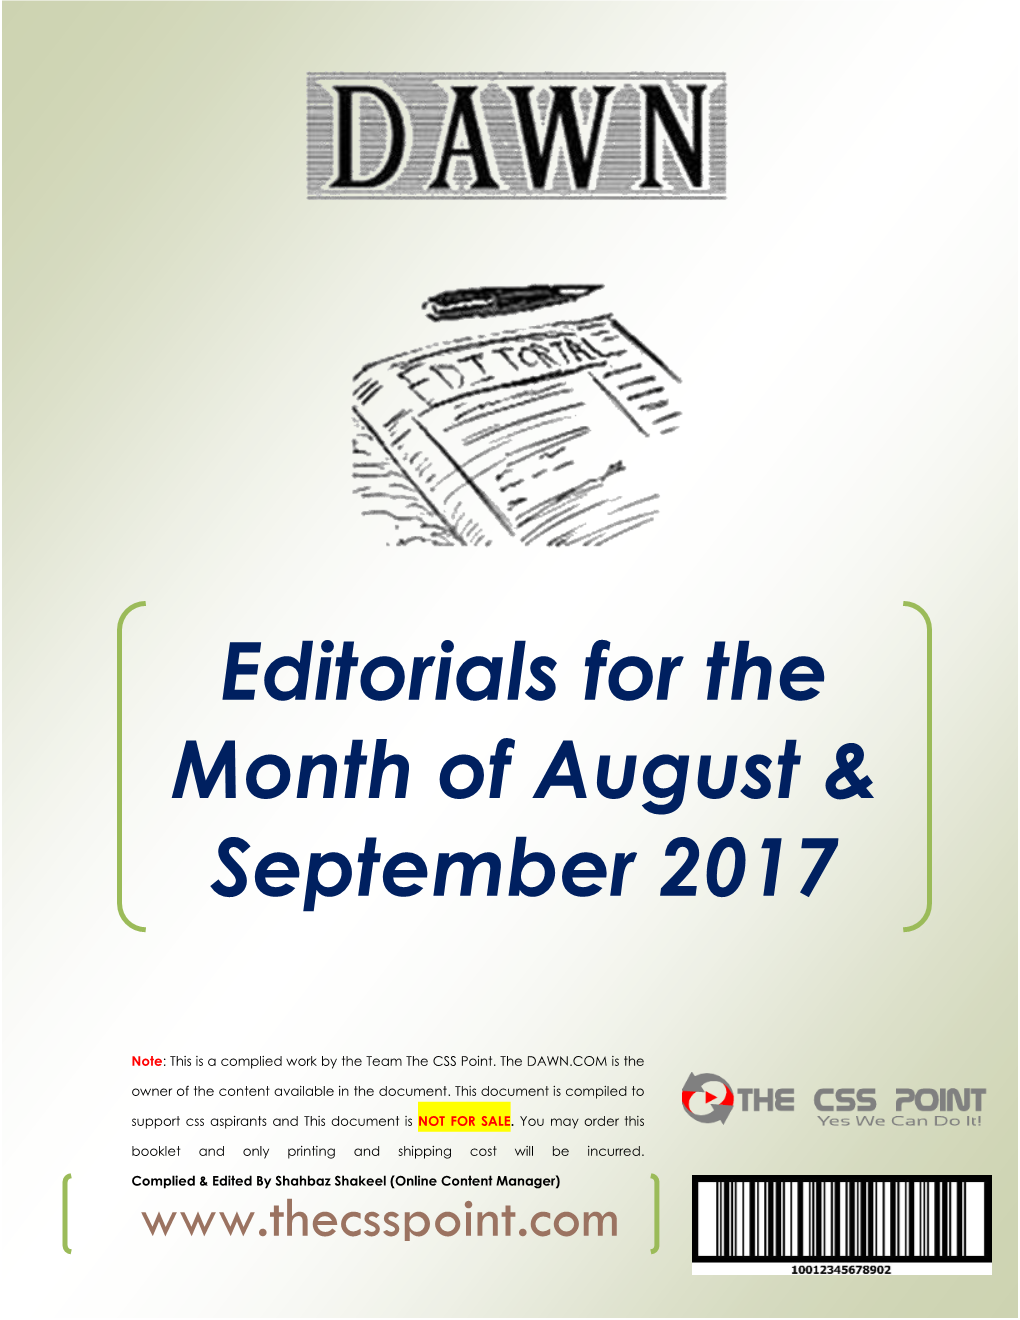 Editorials for the Month of August & September 2017